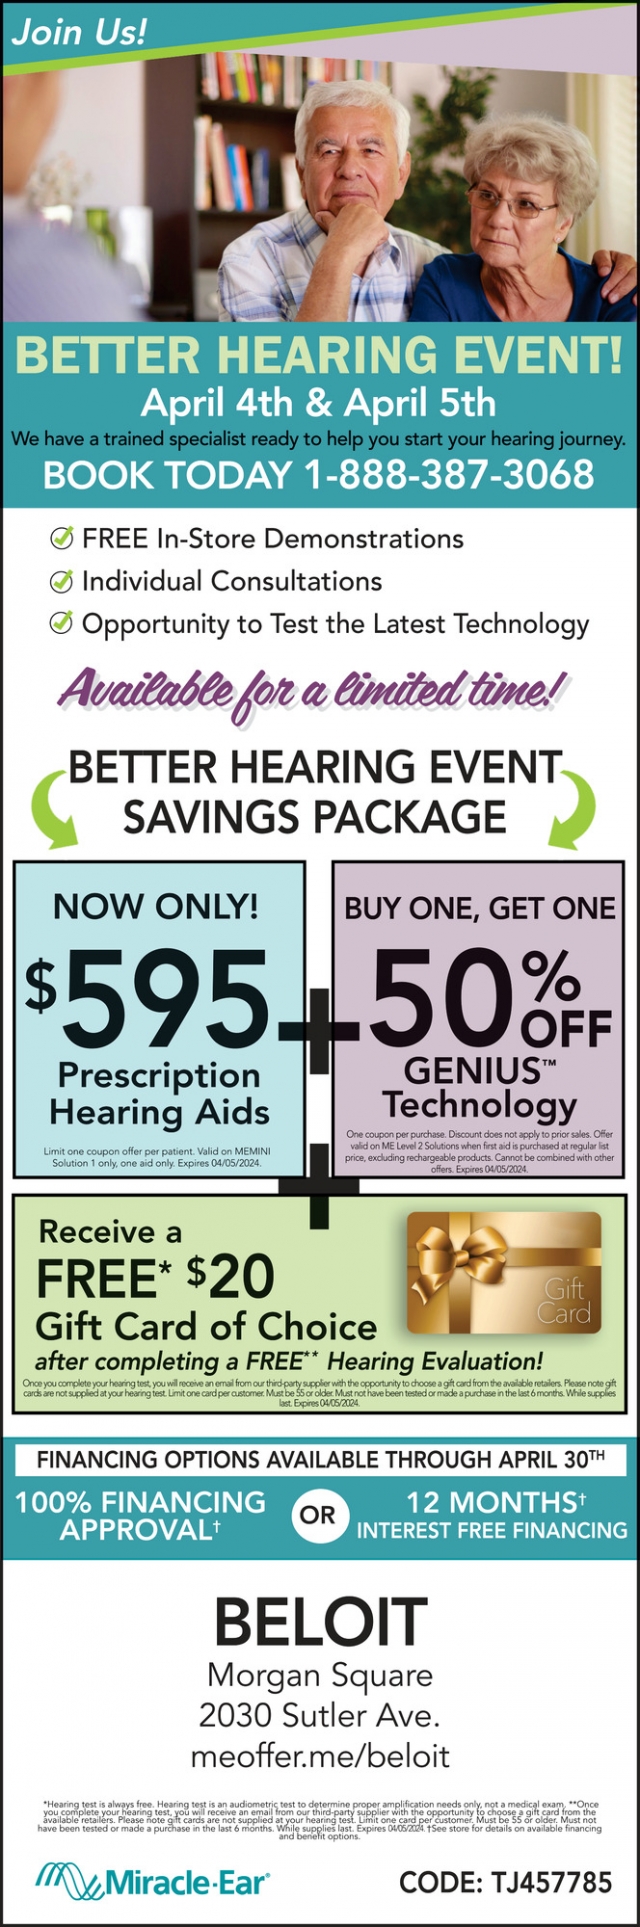 Better Hearing Event!, Miracle Ear, Janesville, WI